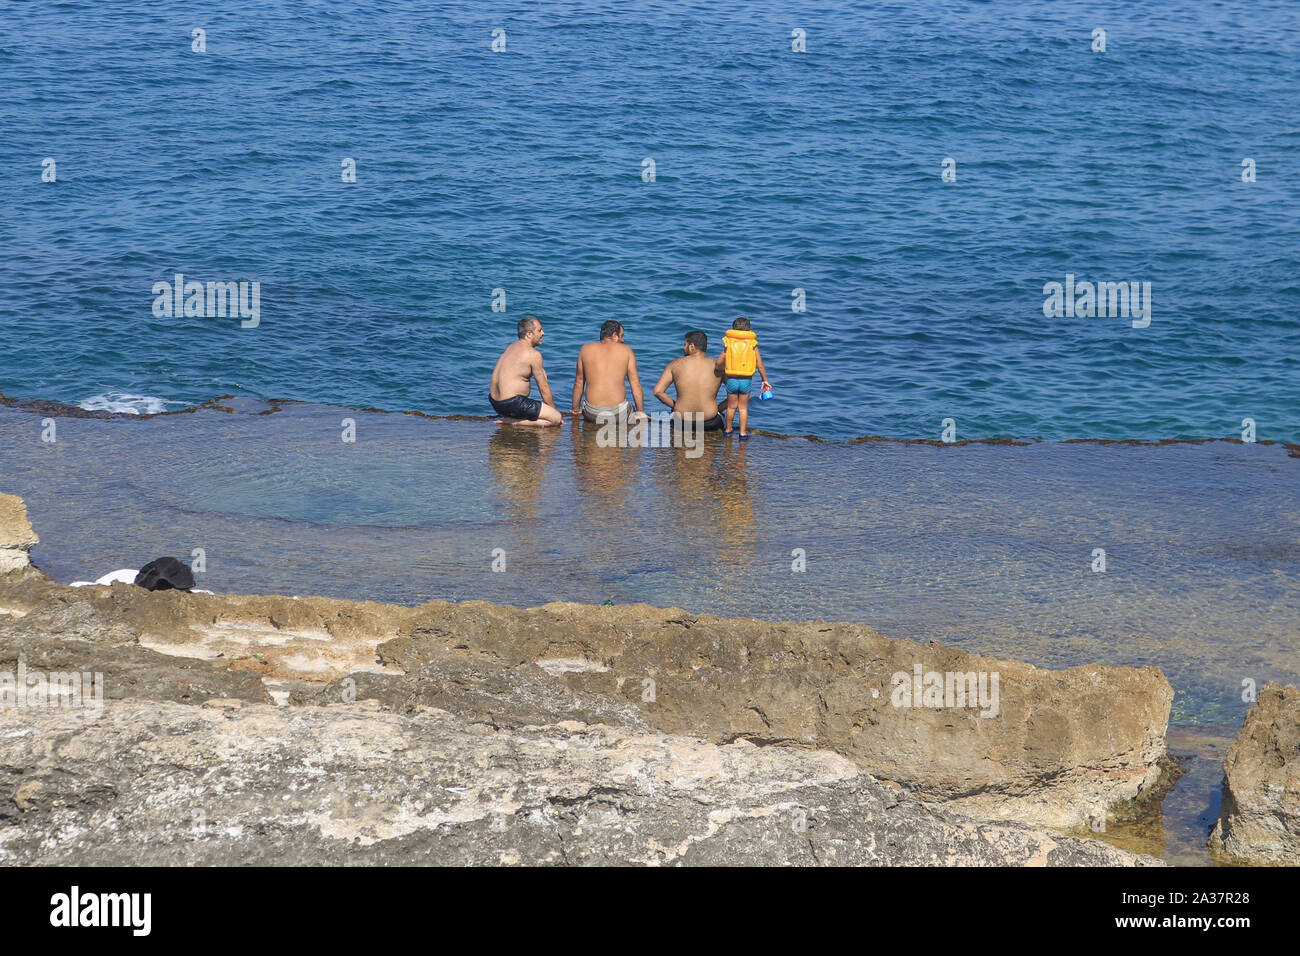 October 6, 2019, Beirut, Lebanon: People cool off at the shores of the sea during the hot and humid day  in Beirut. (Credit Image: © Amer Ghazzal/SOPA Images via ZUMA Wire) Stock Photo